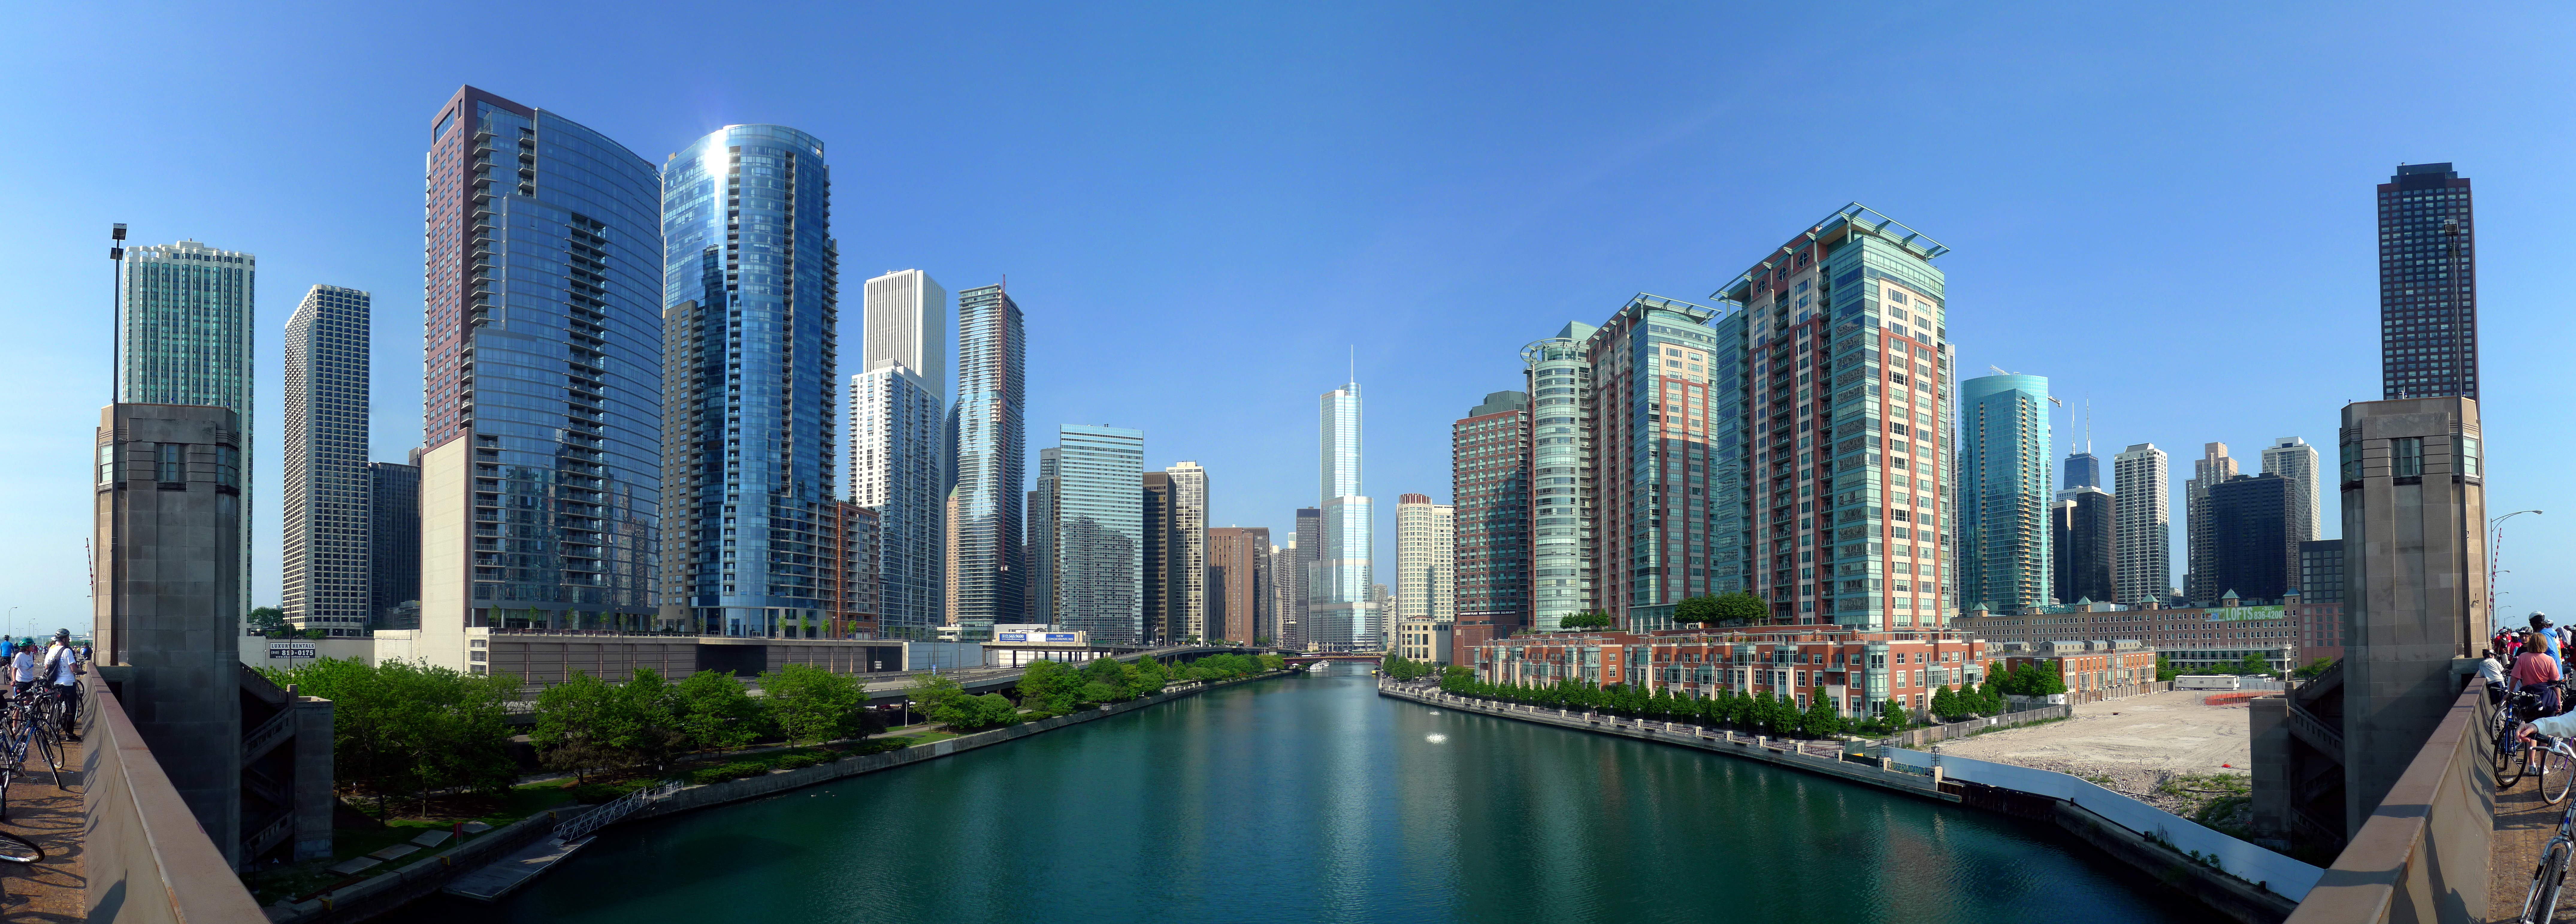 File:20090524 Buildings along Chicago River line the south border of ...